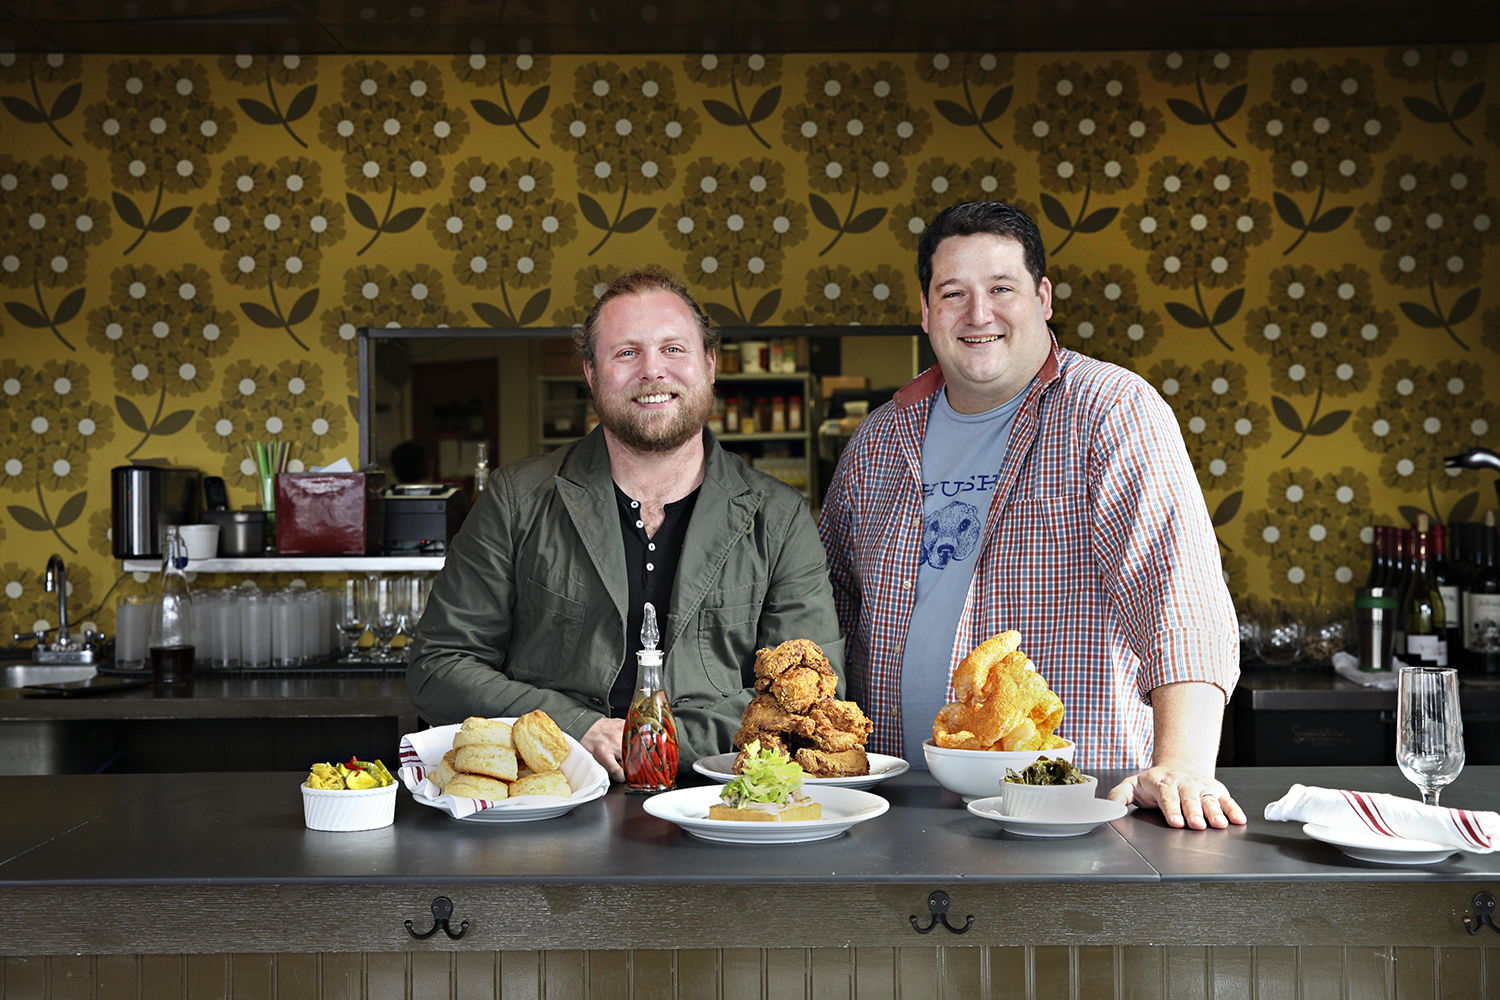 Nick Rancone is on the left, curly blonde hair in a pony tail wearing a suit jacked over a black Henley, Thomas Boemer on the right, with close cropped brown hair, a plaid shirt unbuttoned over a blue t-shirt. In front of them is a spread of Revival dishes including crispy fried chicken.